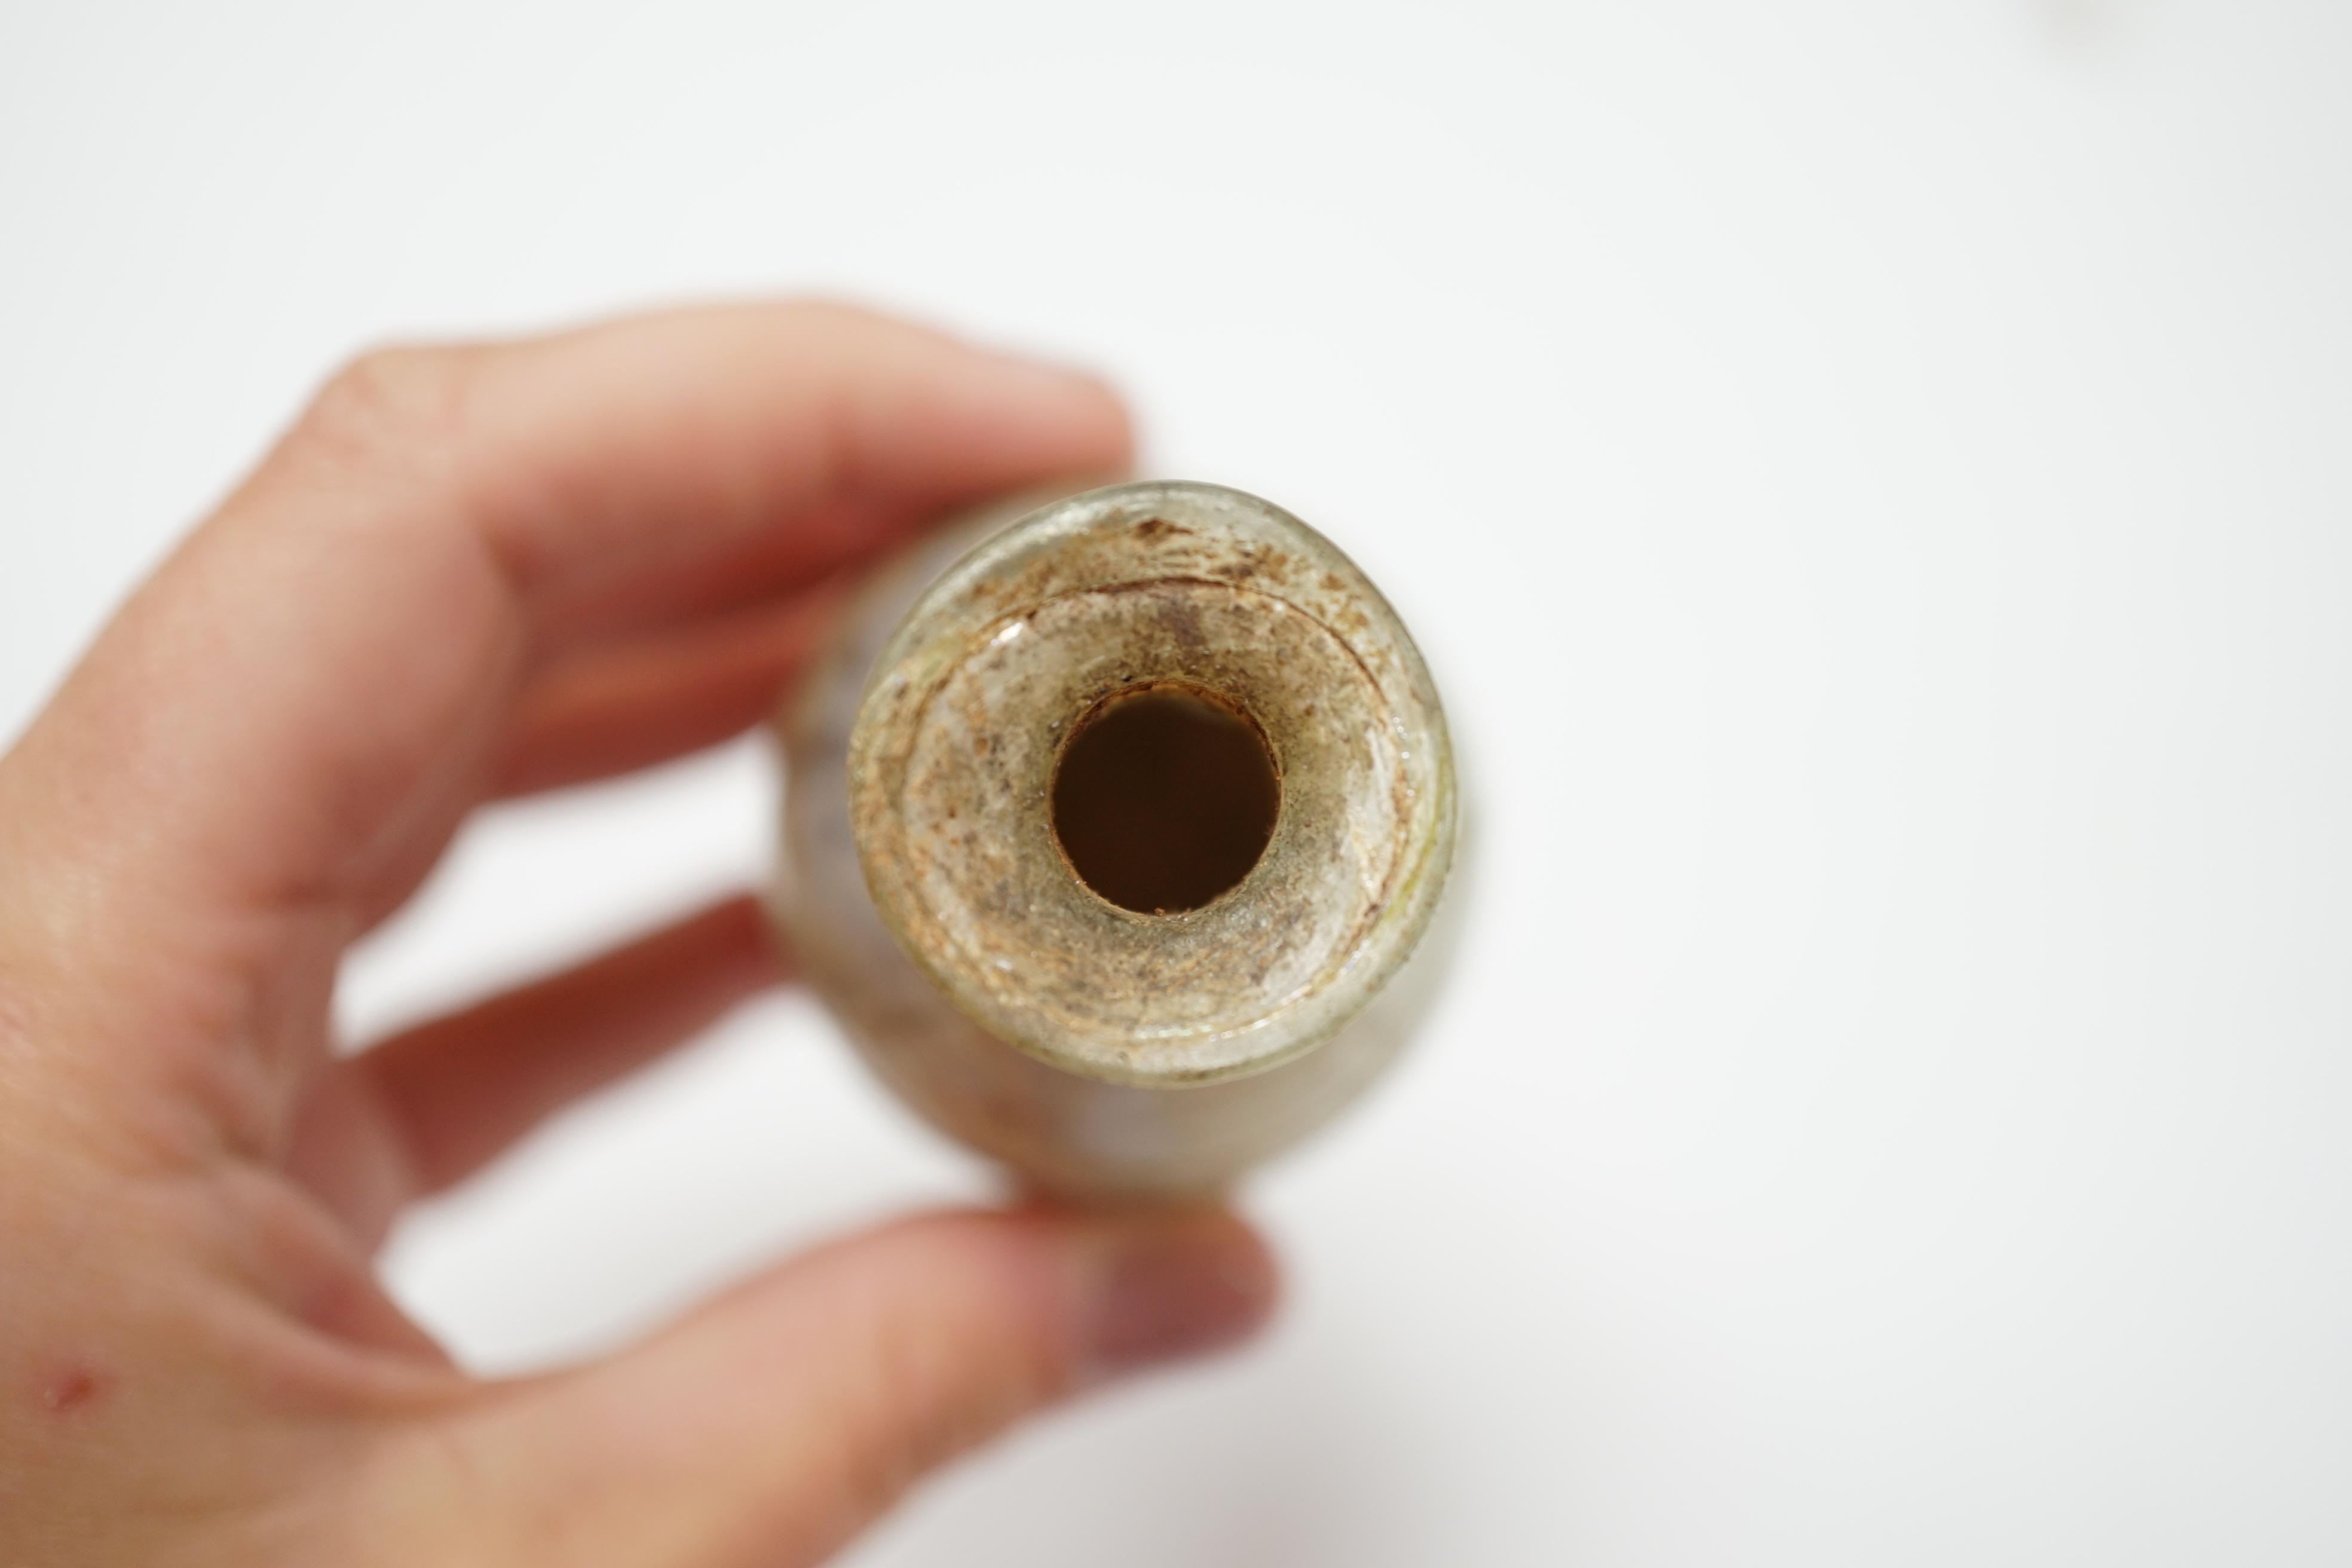 A Roman glass unguentarium, with trailed decoration, 14cm. Condition - poor, has a vertical crack from top to bottom